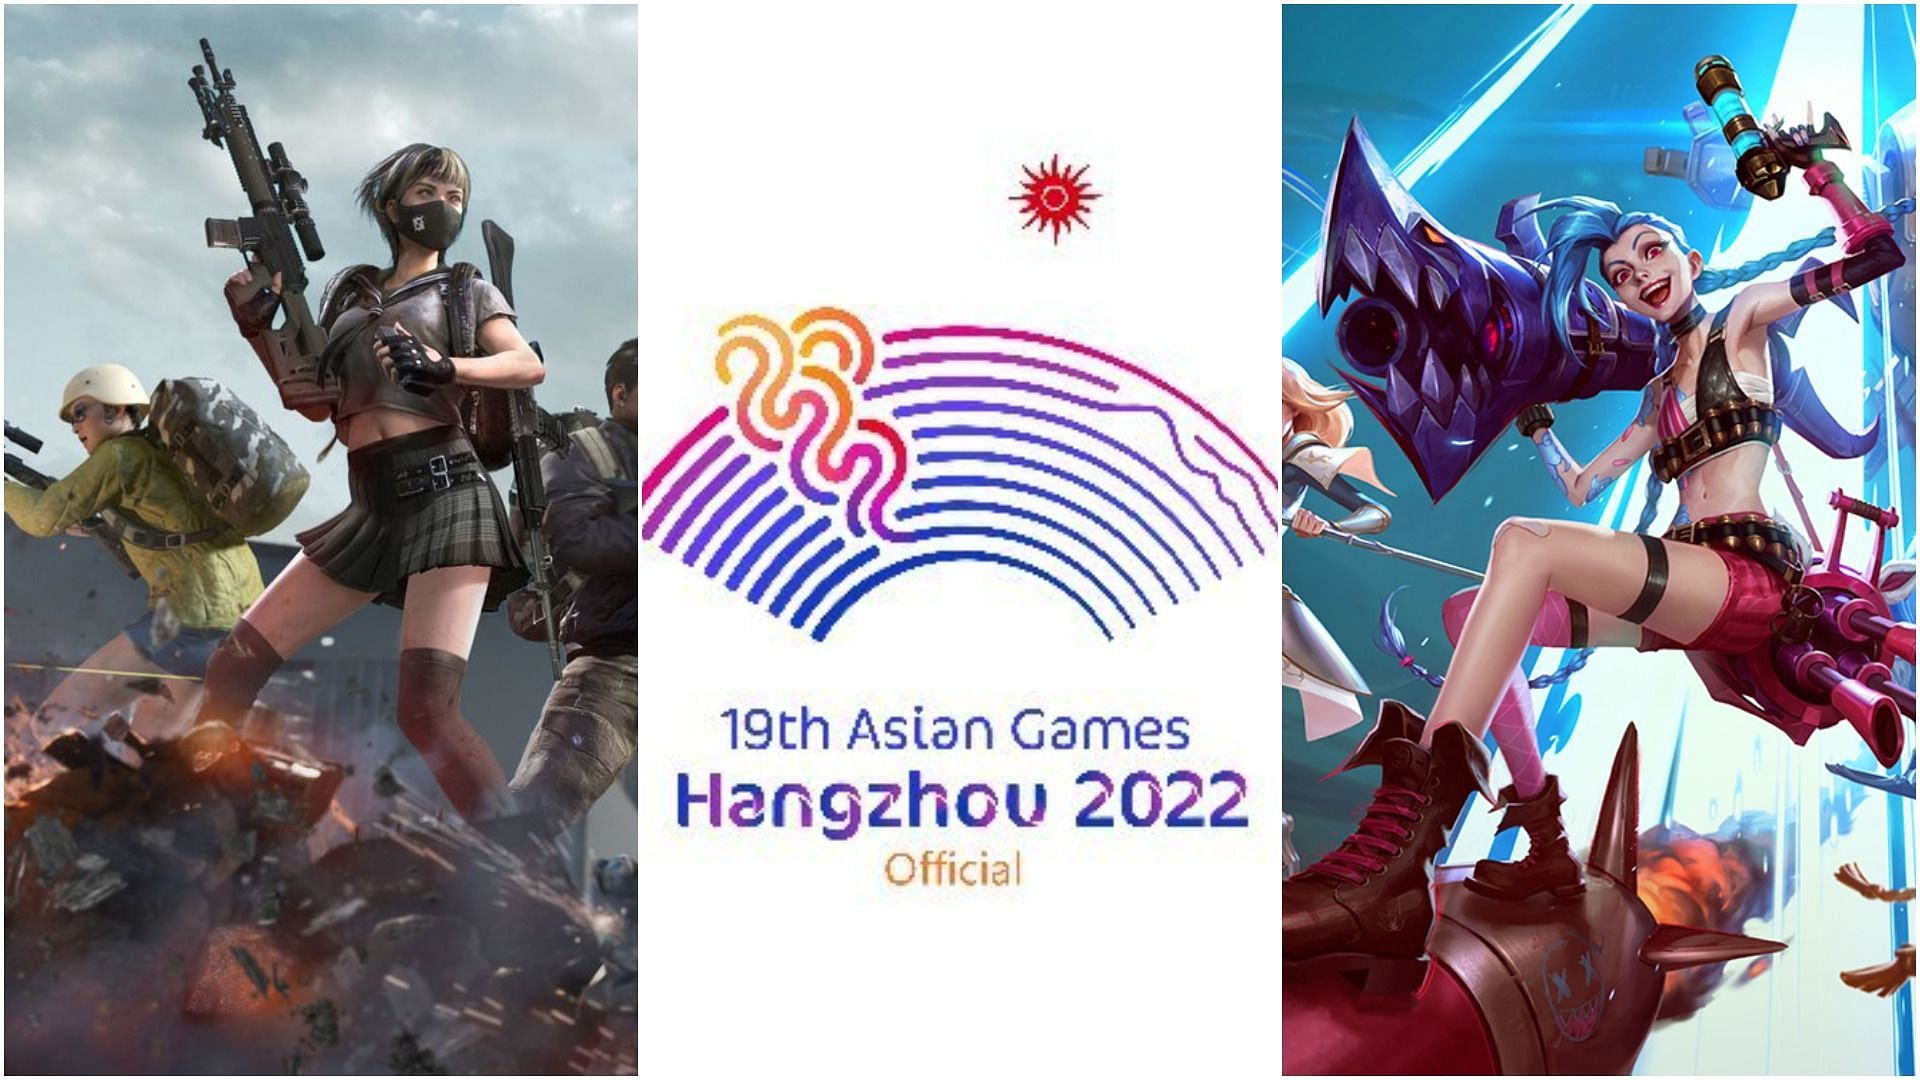 Reports indicate that the 2022 Asian Games which includes PUBG Mobile and other esports titles may be delayed until 2023